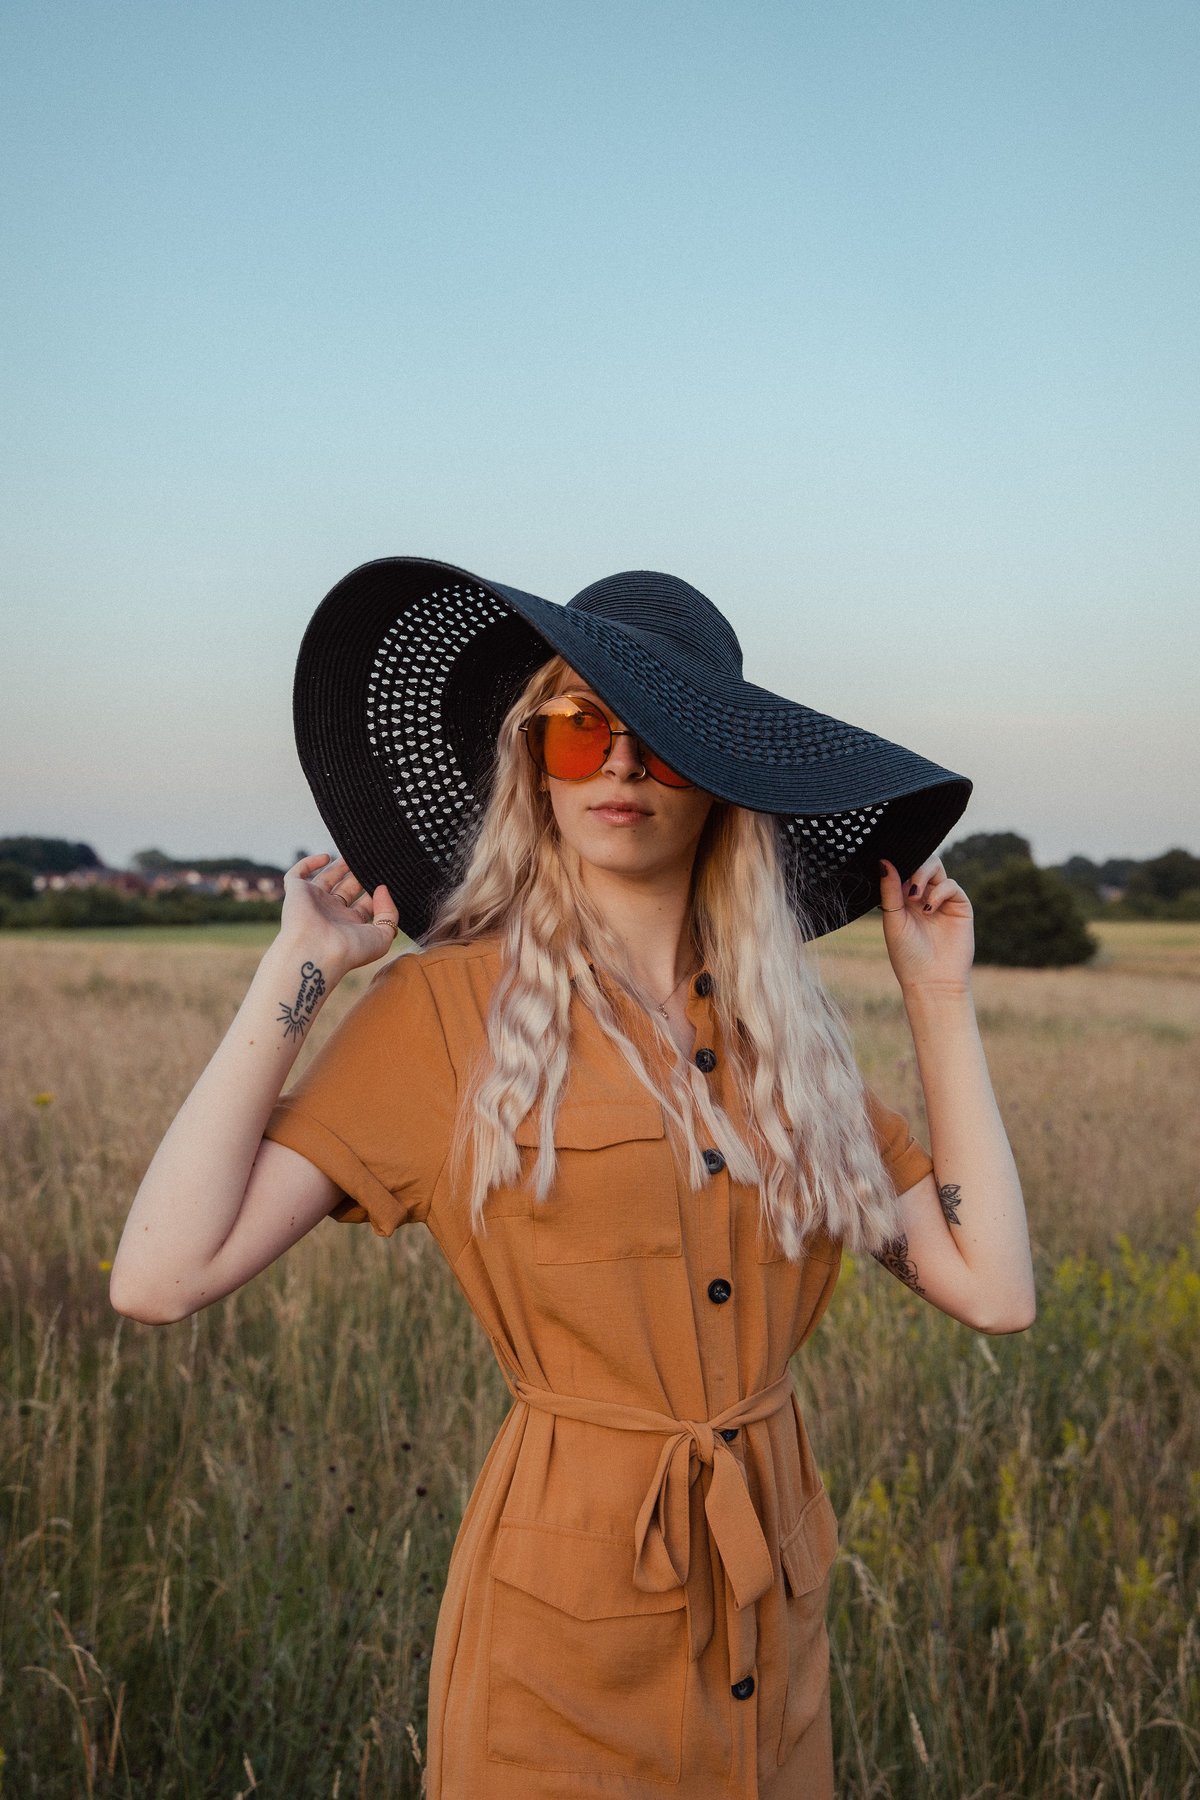 Amber stood in the grass at golden hour, wearing orange sunglasses and a black straw hat